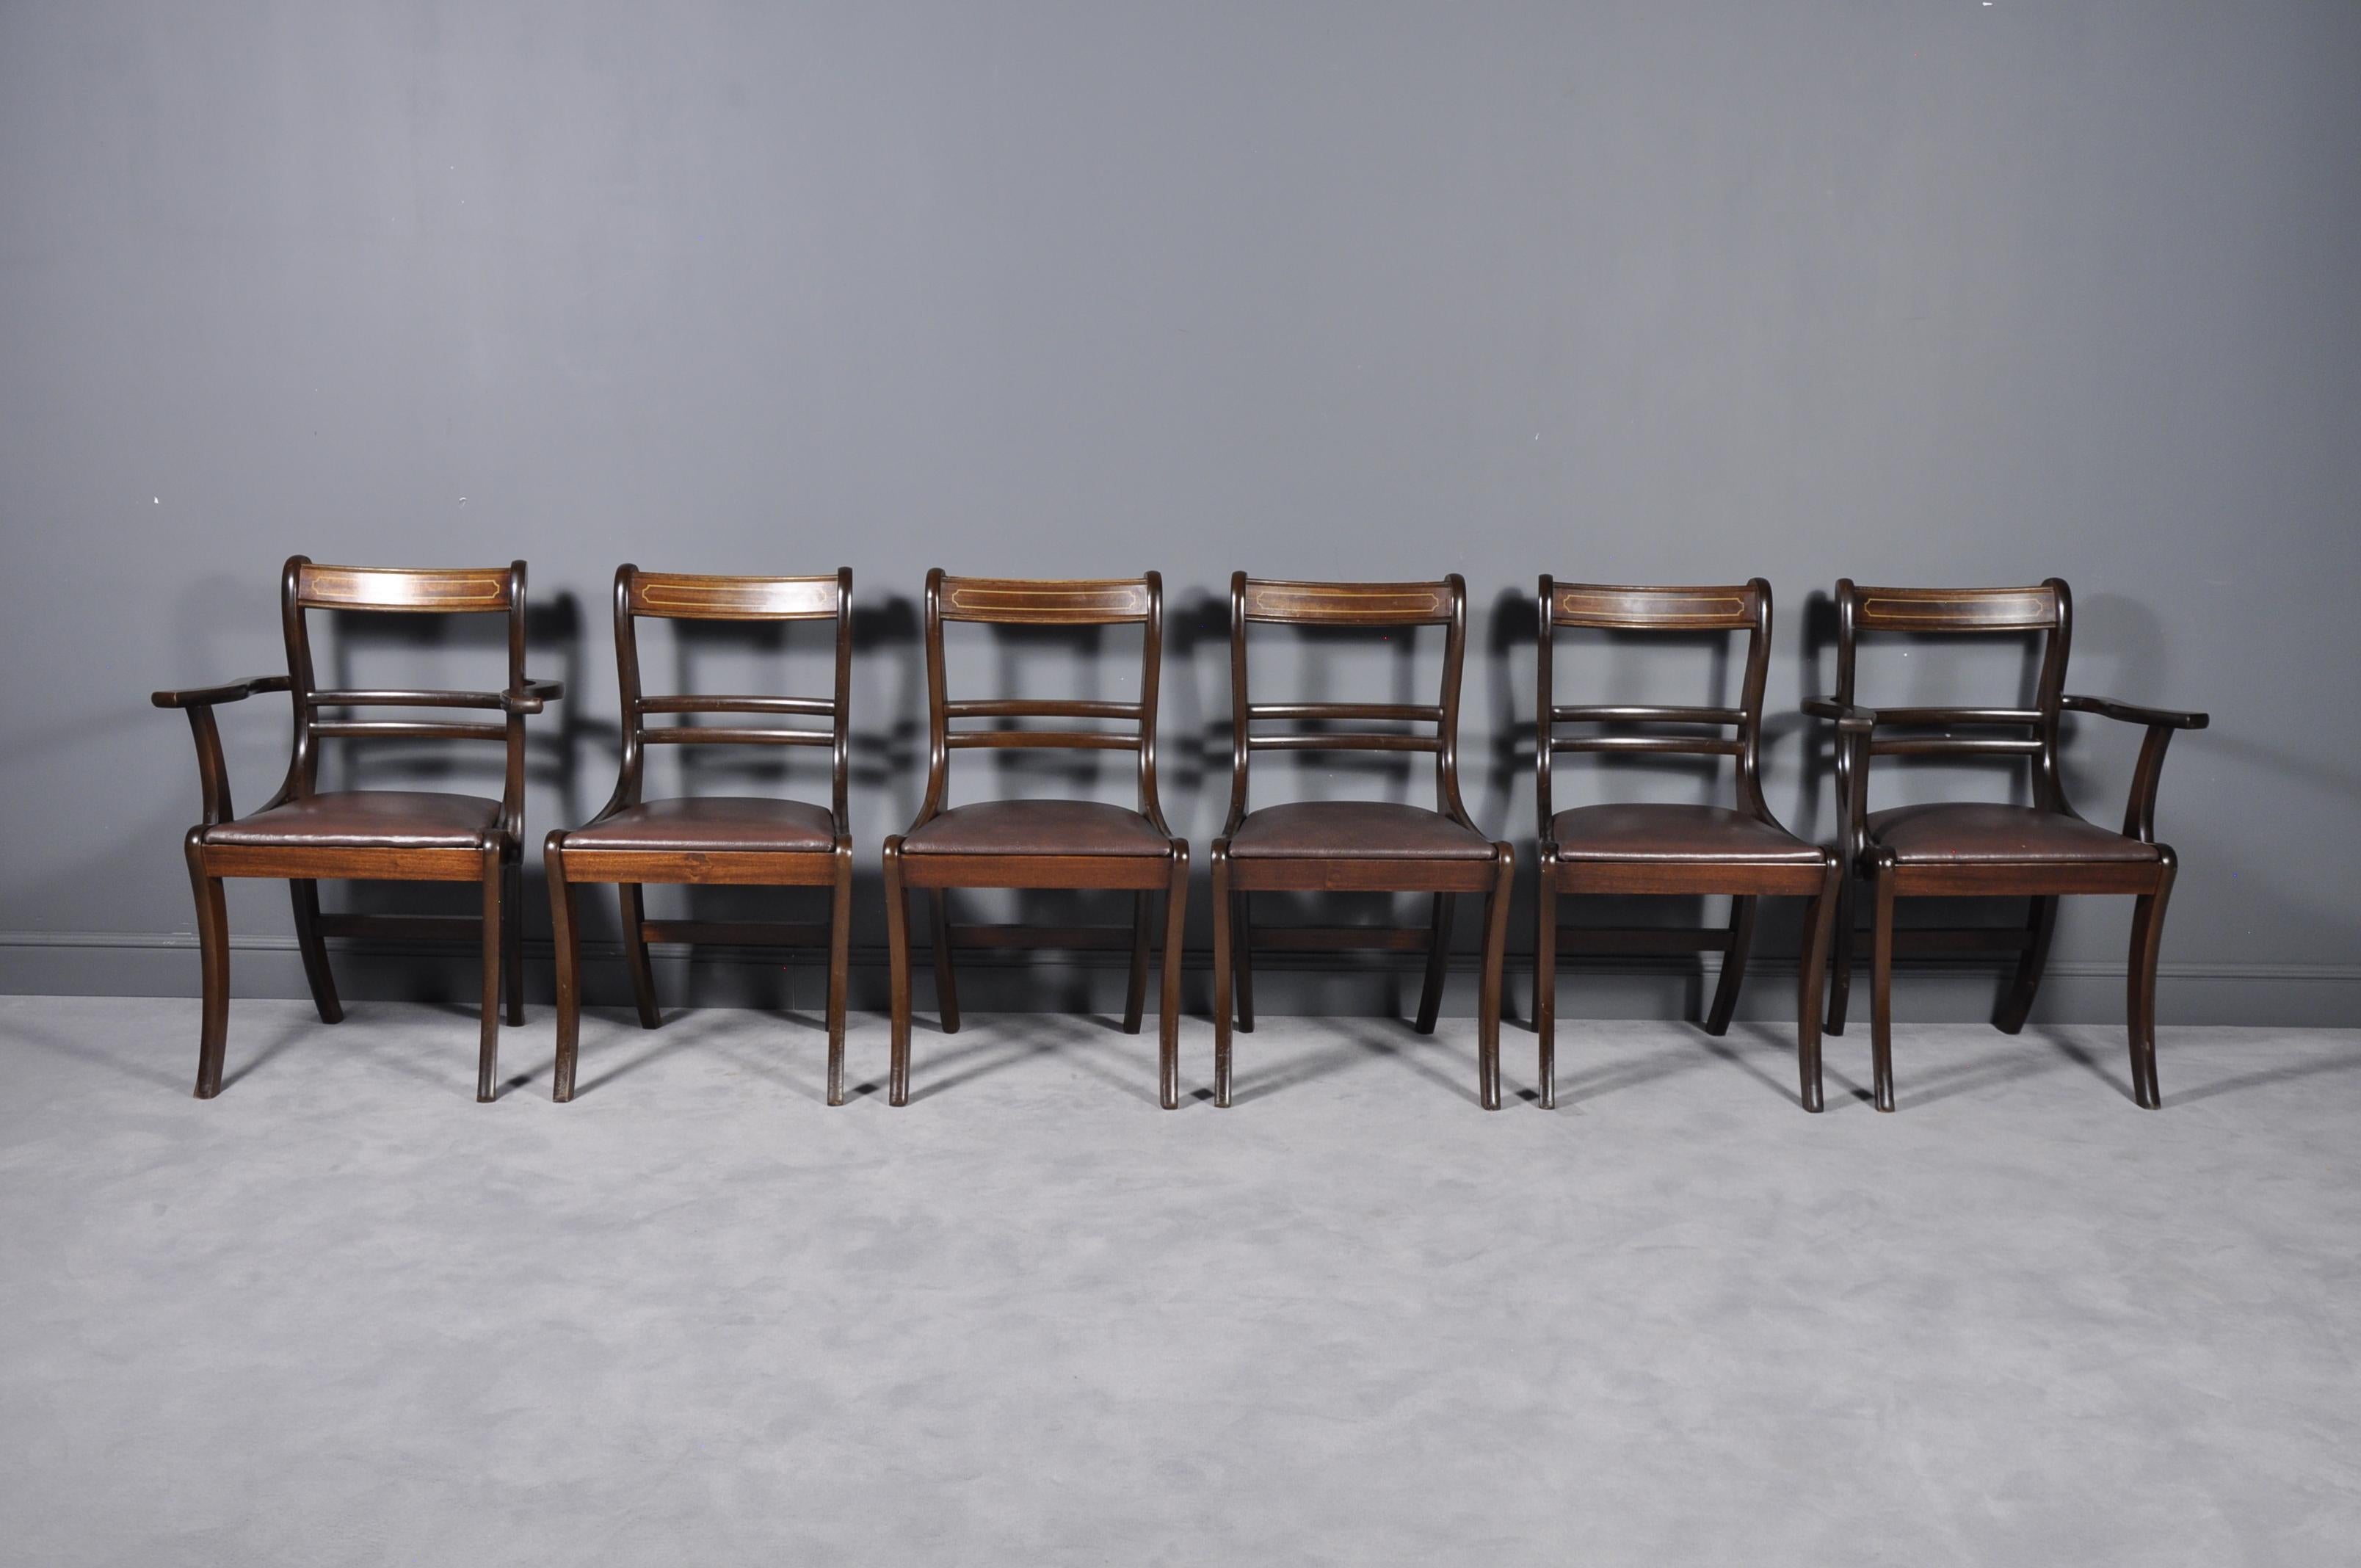 British Set of Six 19th Century English Neoclassical Dining Chairs For Sale